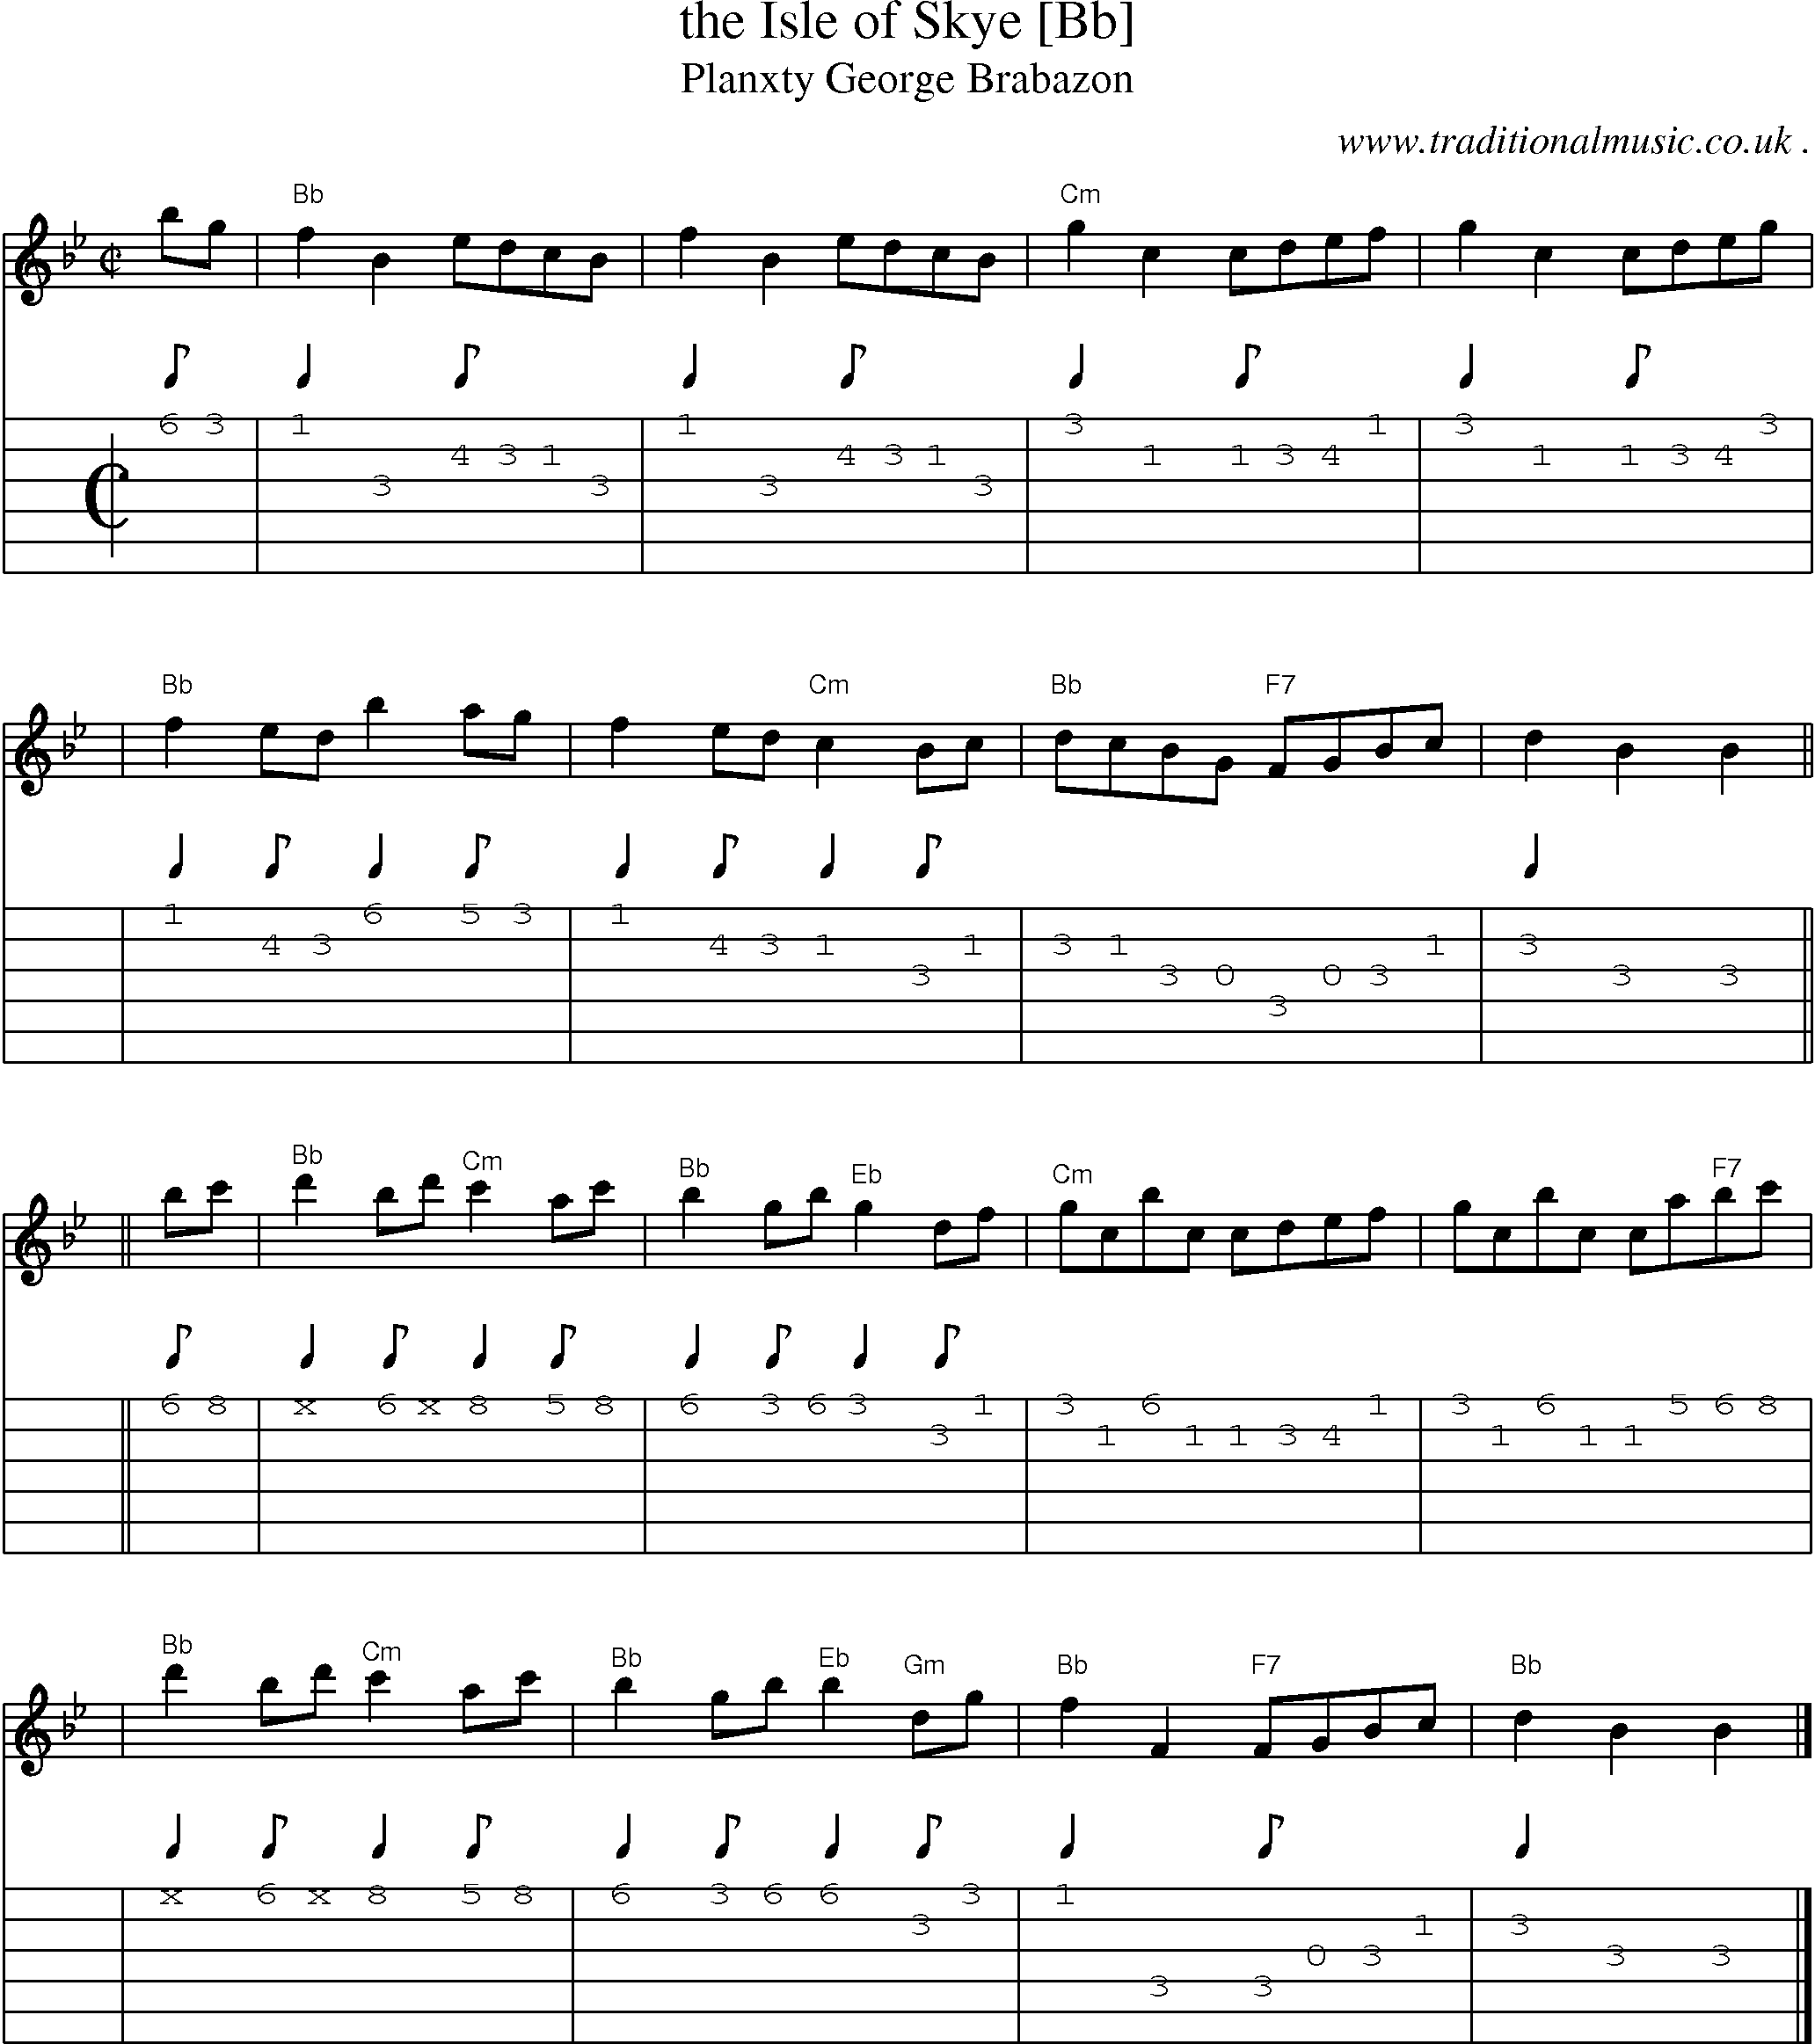 Sheet-music  score, Chords and Guitar Tabs for The Isle Of Skye [bb]